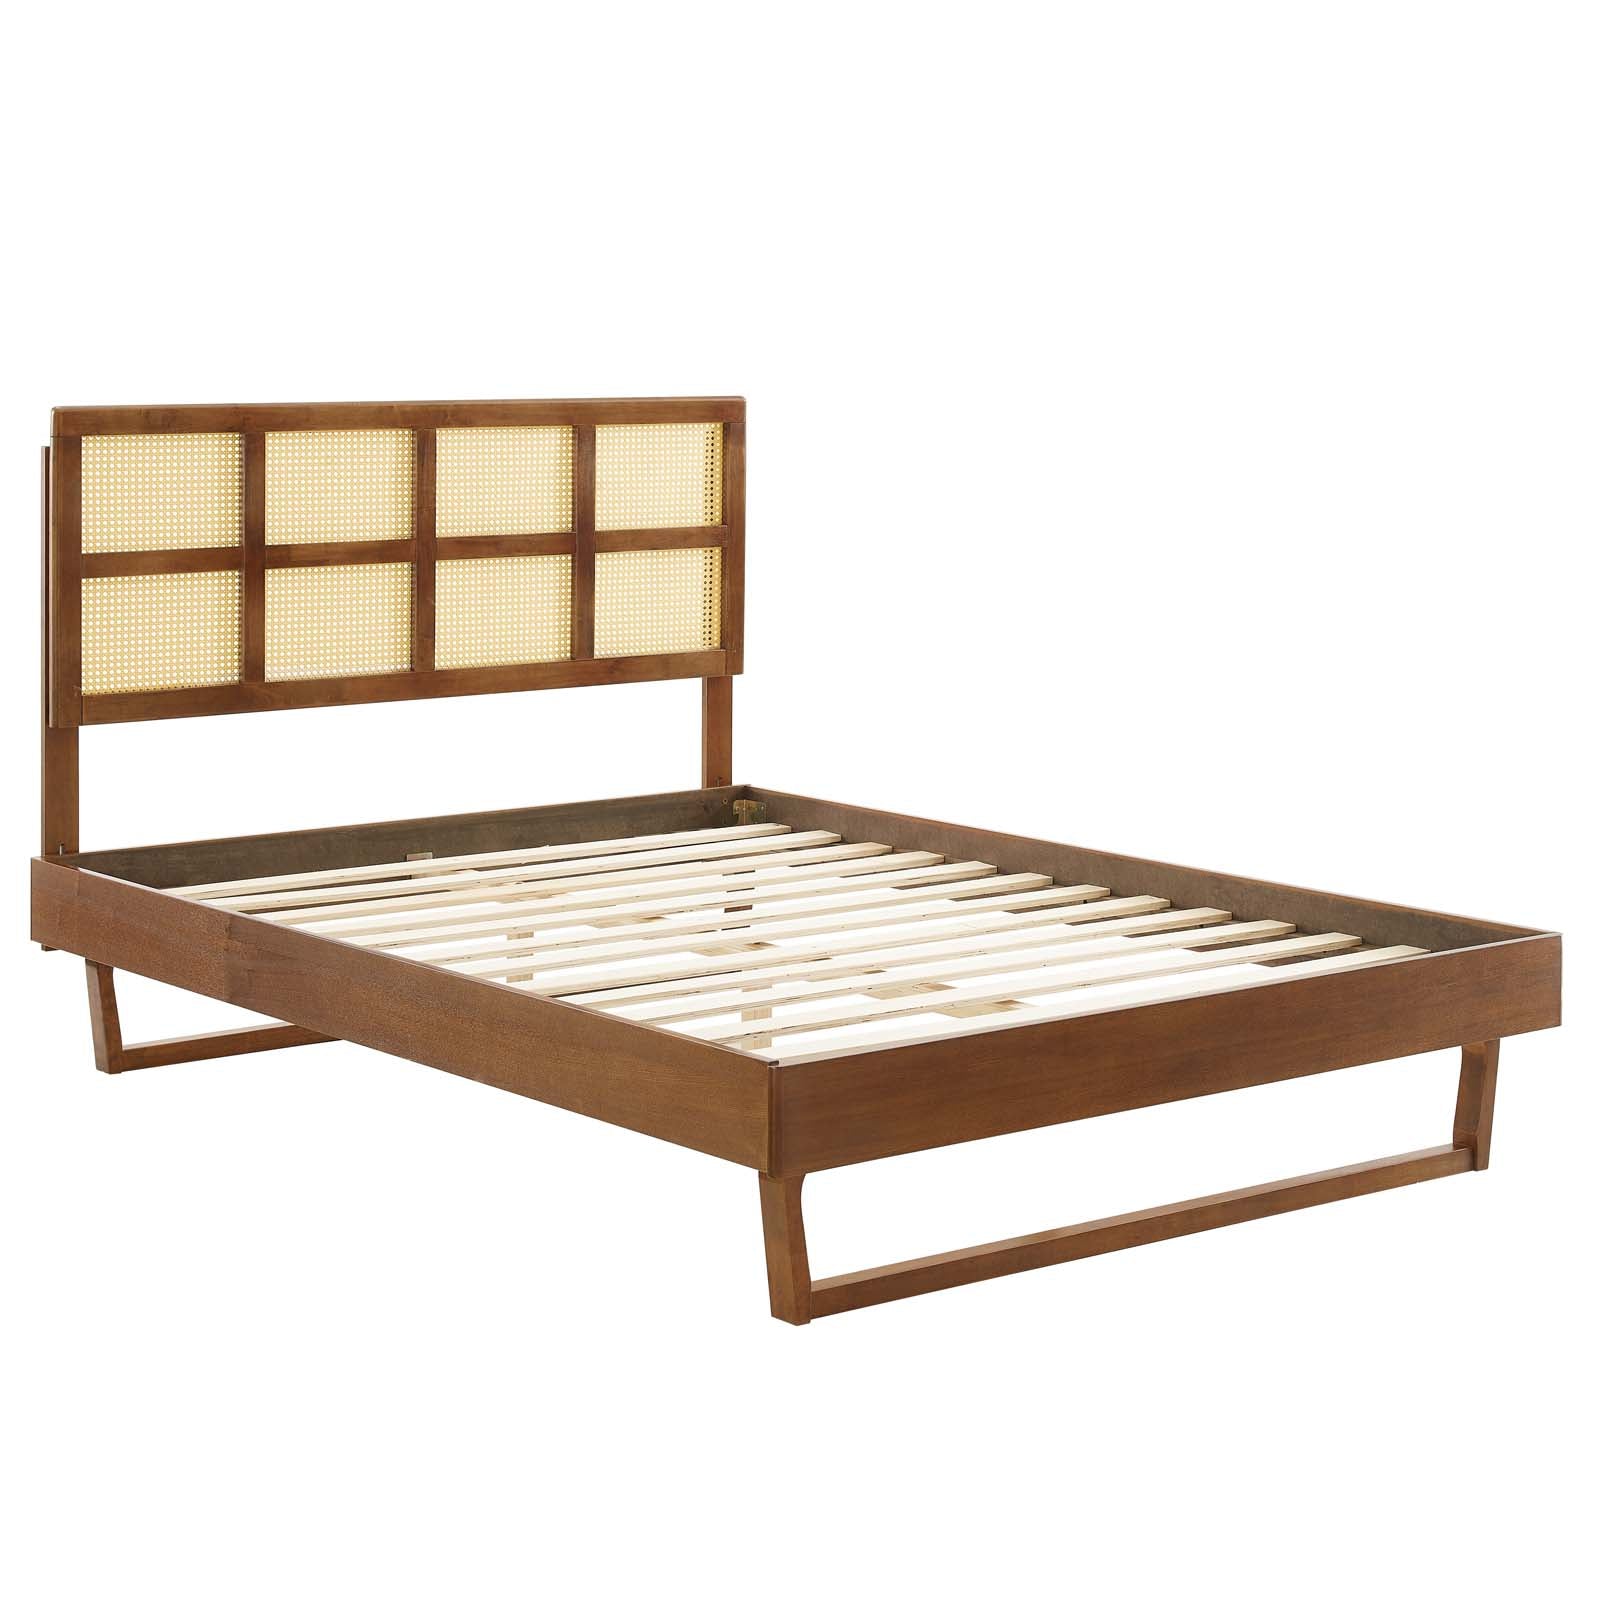 Modway Beds - Sidney Cane and Wood Full Platform Bed With Angular Legs Walnut